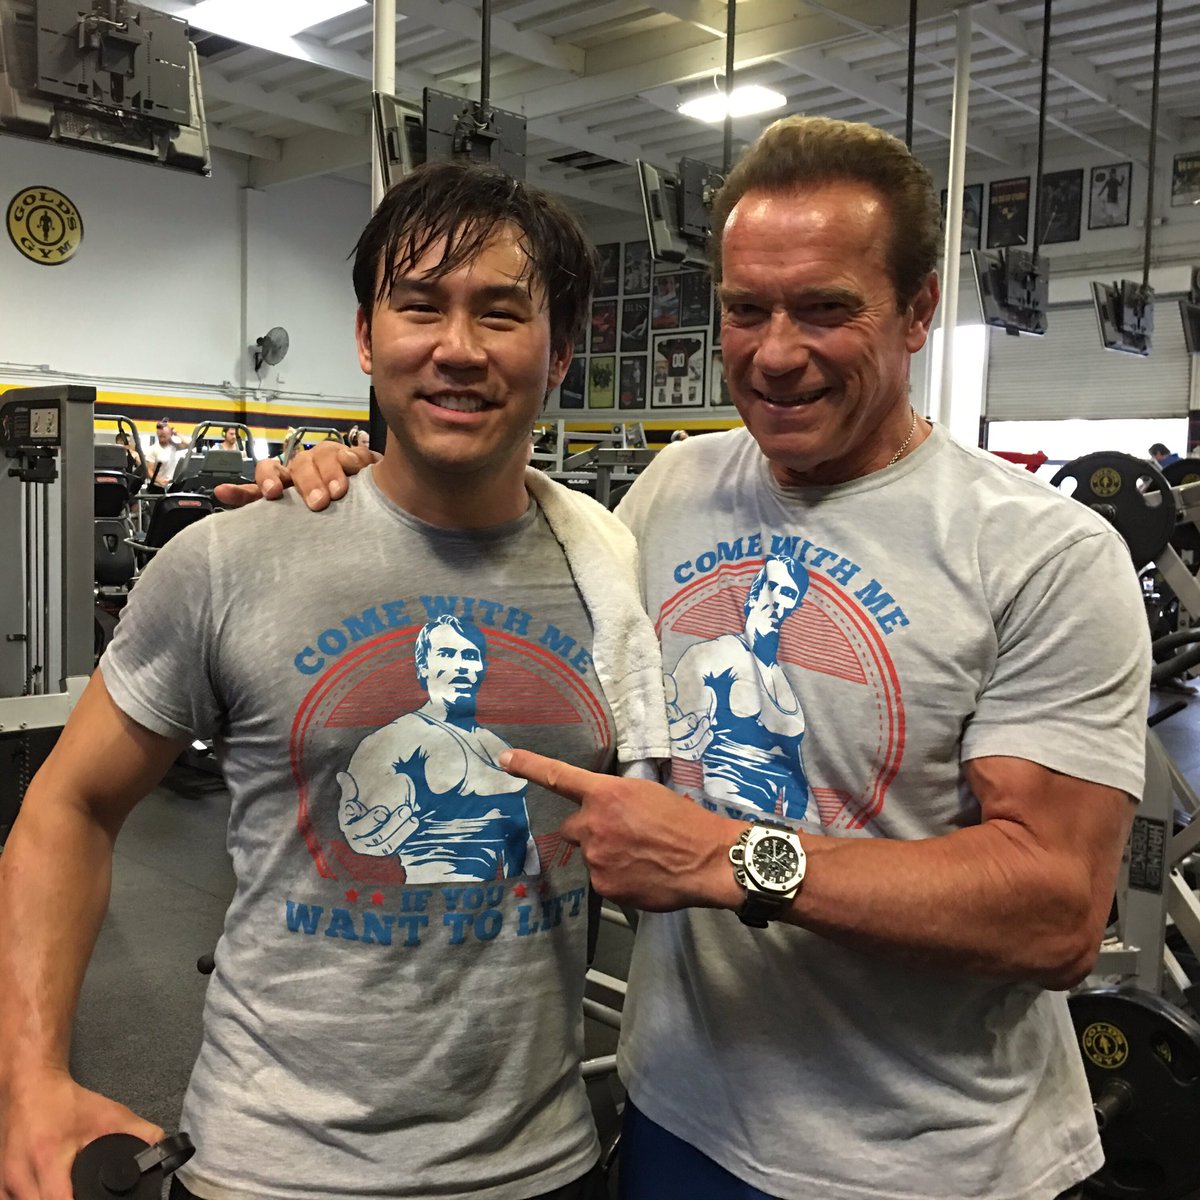 Just ran into Peter in the gym! Love seeing so many people who joined the movement.  #comewithmeifyouwanttolift https://t.co/sZH97rMf9m